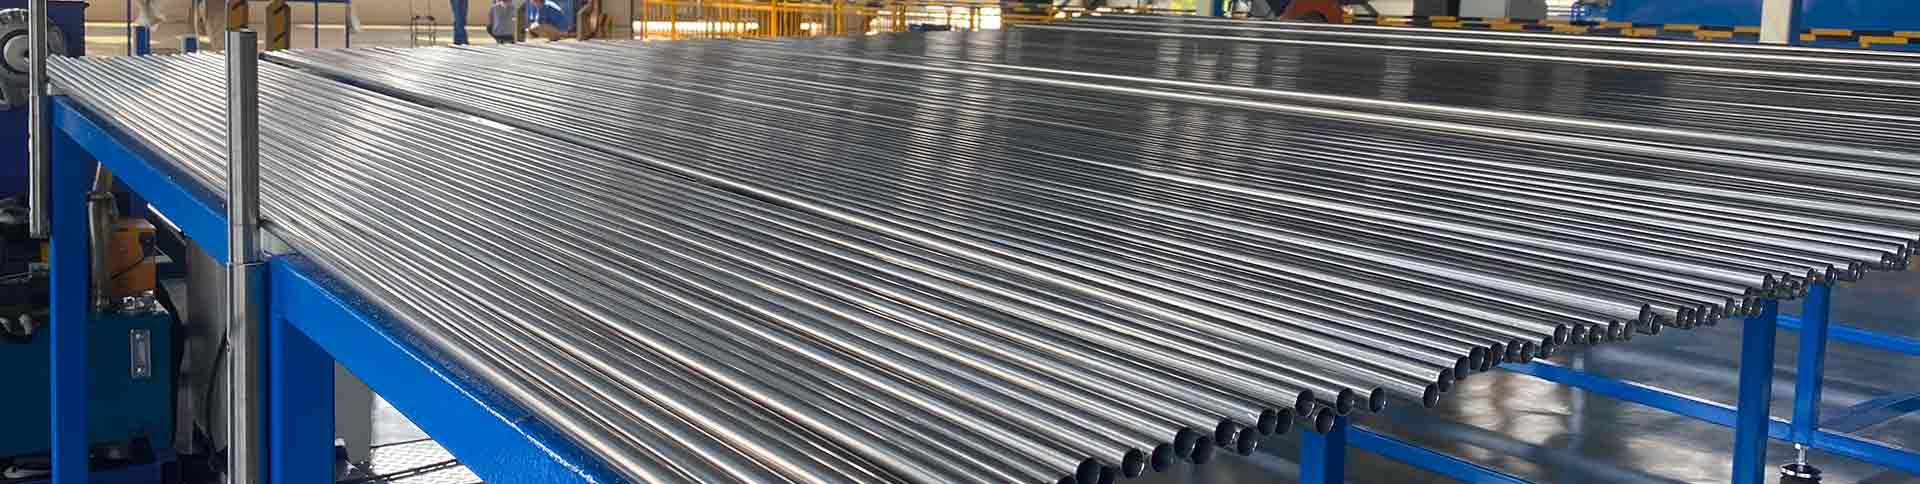 What are the safety requirements for duplex stainless steel pipes?